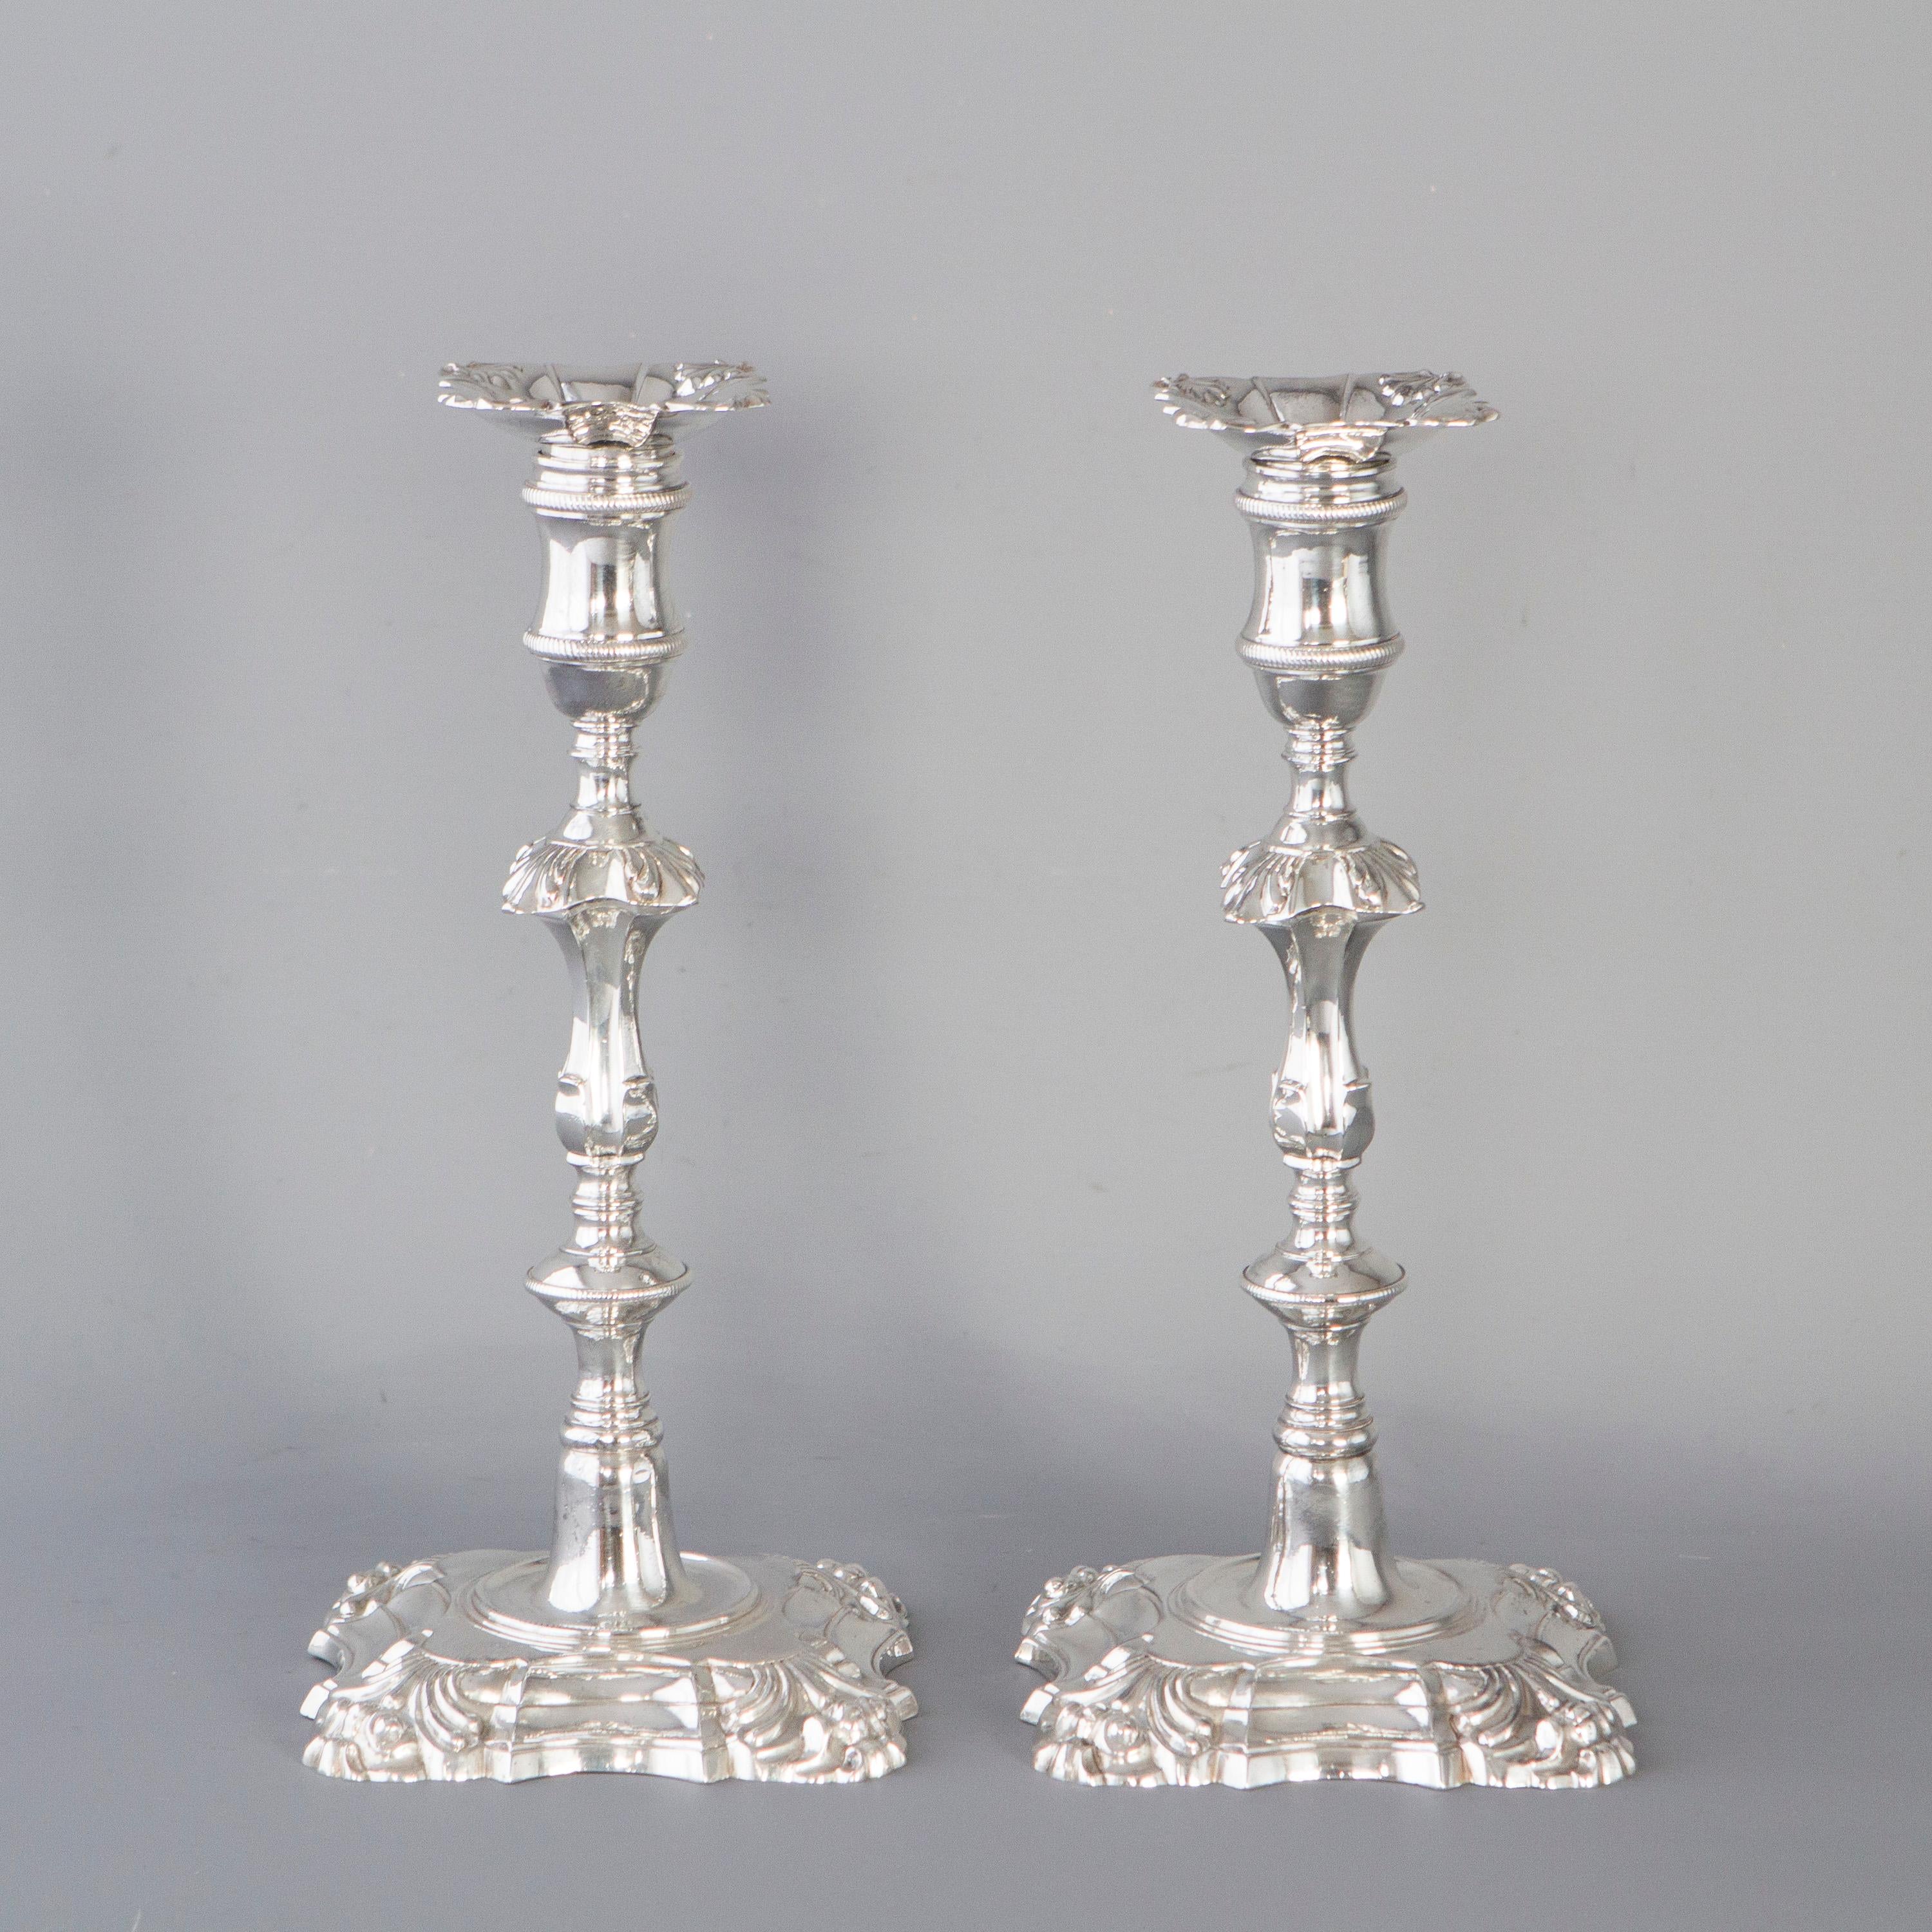 A superb pair of cast George III silver candlesticks by William Cafe, London, 1762. With square bases shaped and stepped with floral form corners. The fluted columns rising above a rope decorated circular knop to a square knop with matching floral